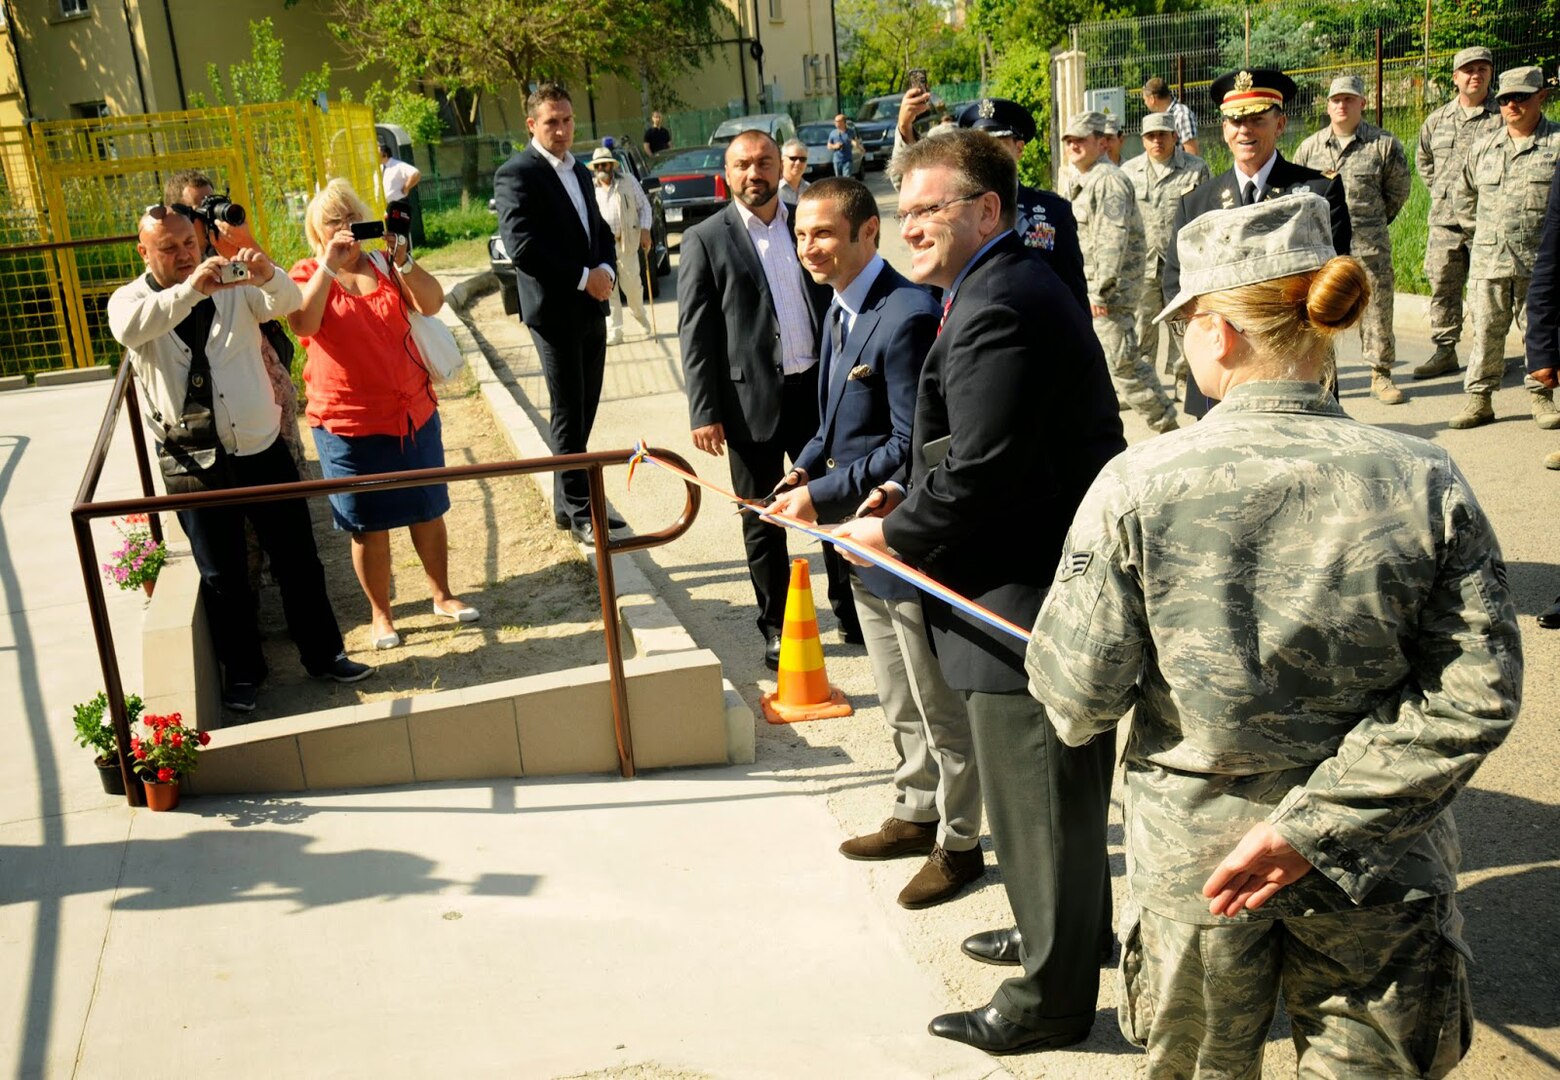 State Department official Dean Thompson, along with mayor of Mangalia, Romania, Radu Cristian, cut the ribbon to the renovated Pavilion C of the Mangalia City Hospital, Romania, May 20, 2015, as part of the U.S. European Command’s (EUCOM) Humanitarian Civic Assistance Program (HCA). The EUCOM HCA program is designed to improve the host nation's critical infrastructure and the underlying living conditions of the civilian populace.